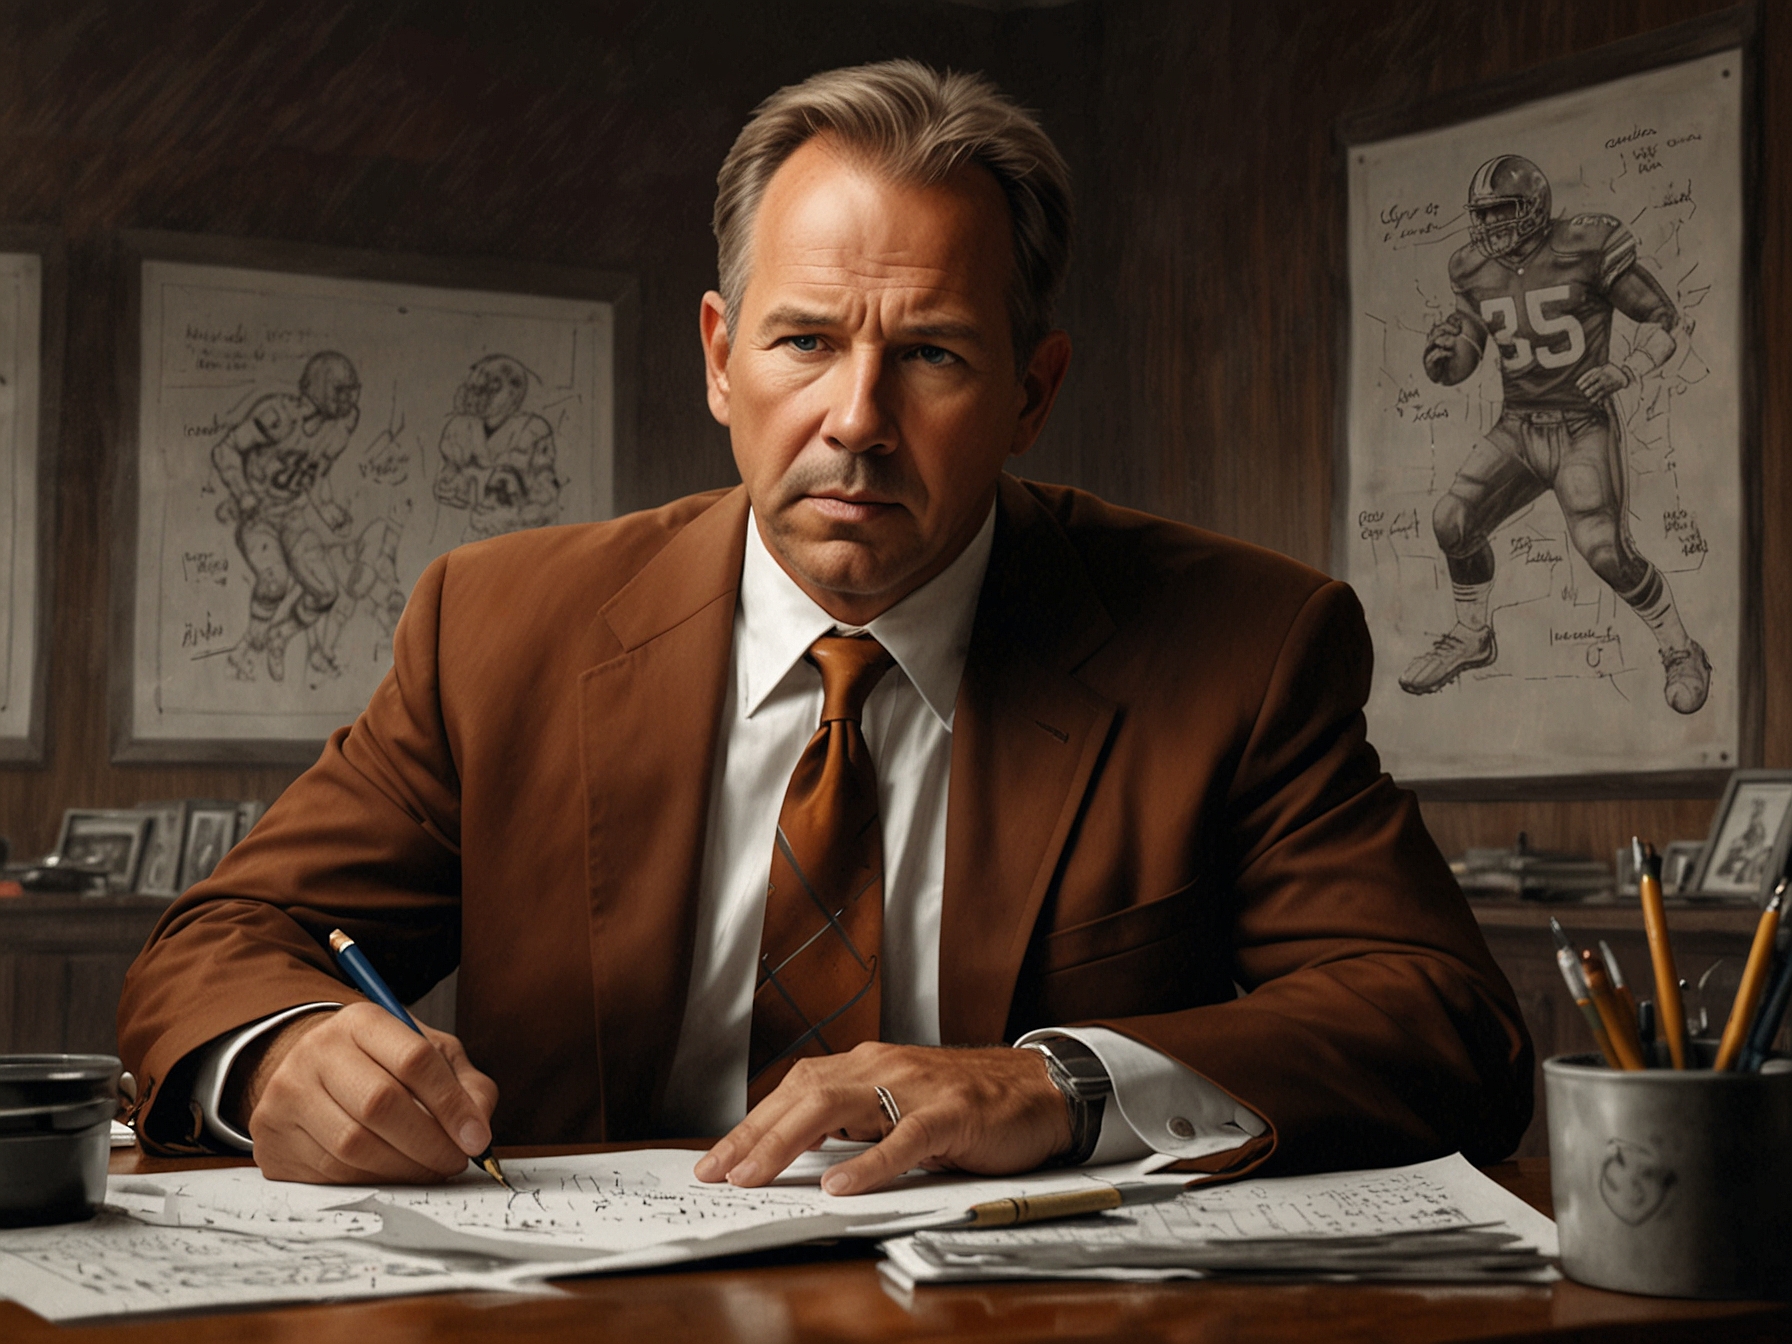 Costner in 'Draft Day' as Sonny Weaver Jr., the Cleveland Browns' GM, navigating intense NFL Draft Day decisions, demonstrating his dynamic performance in a high-pressure sports drama.